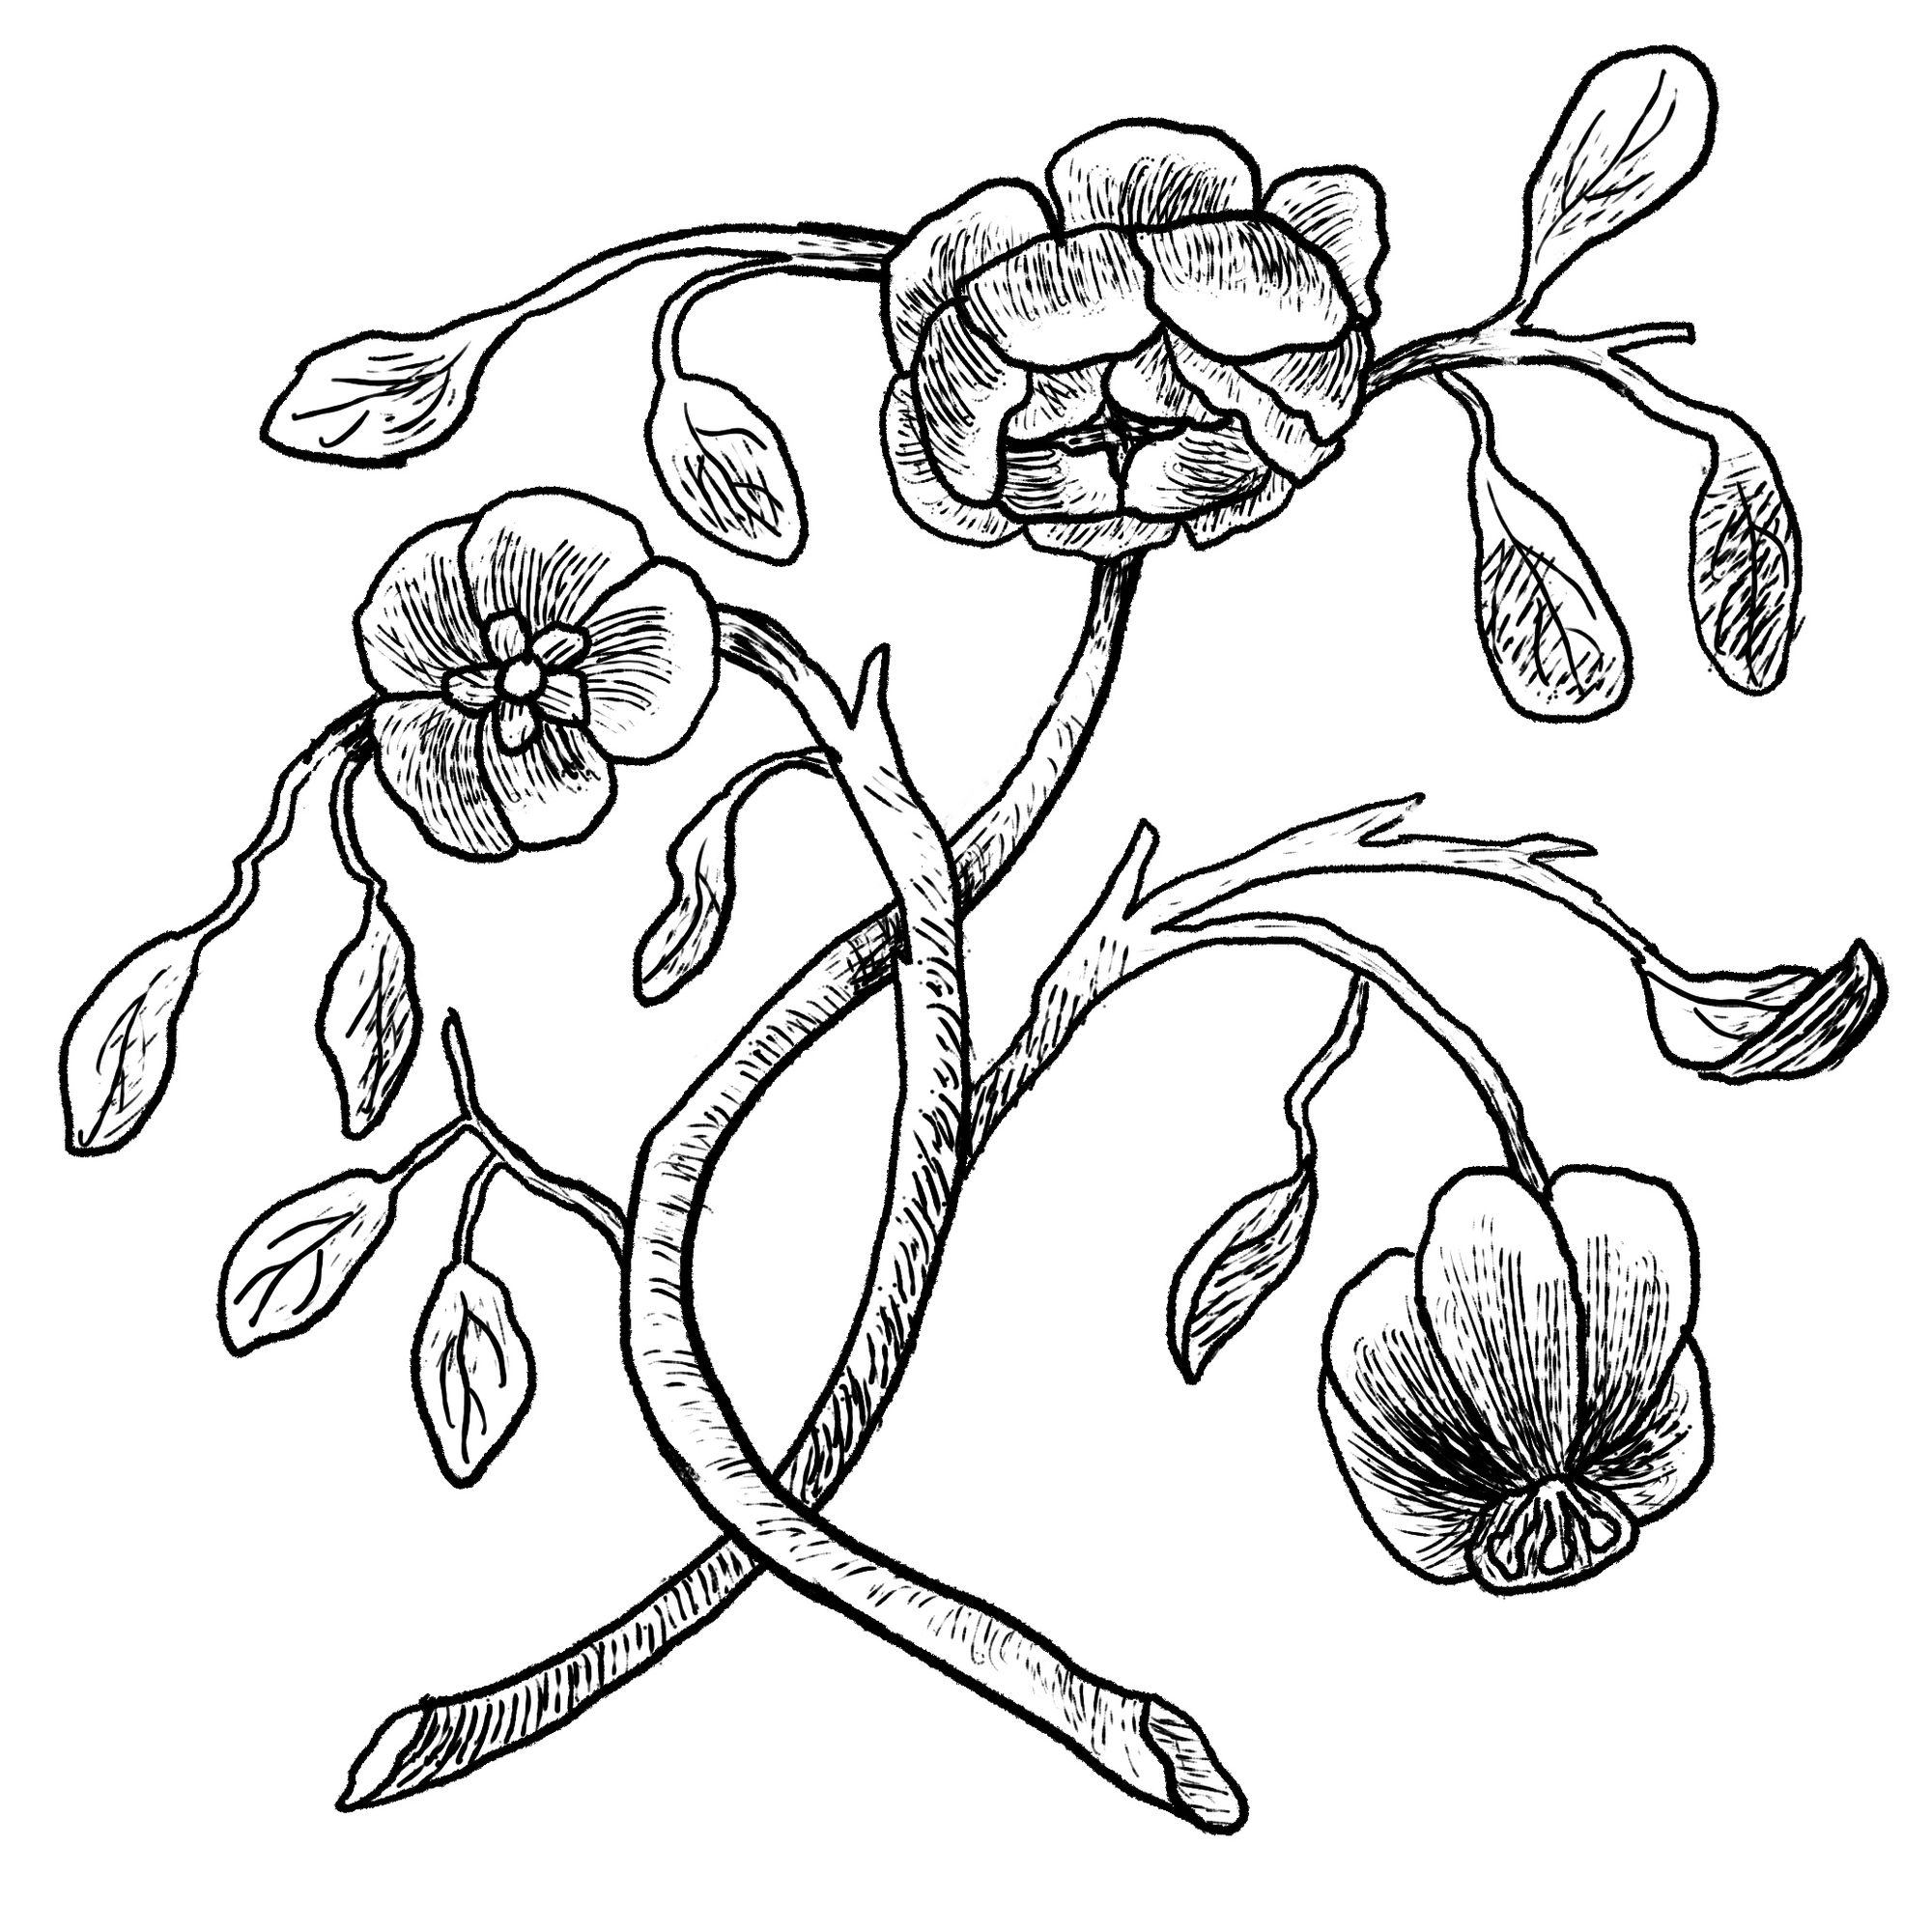 engraving style flowers based on a 19th century illustration